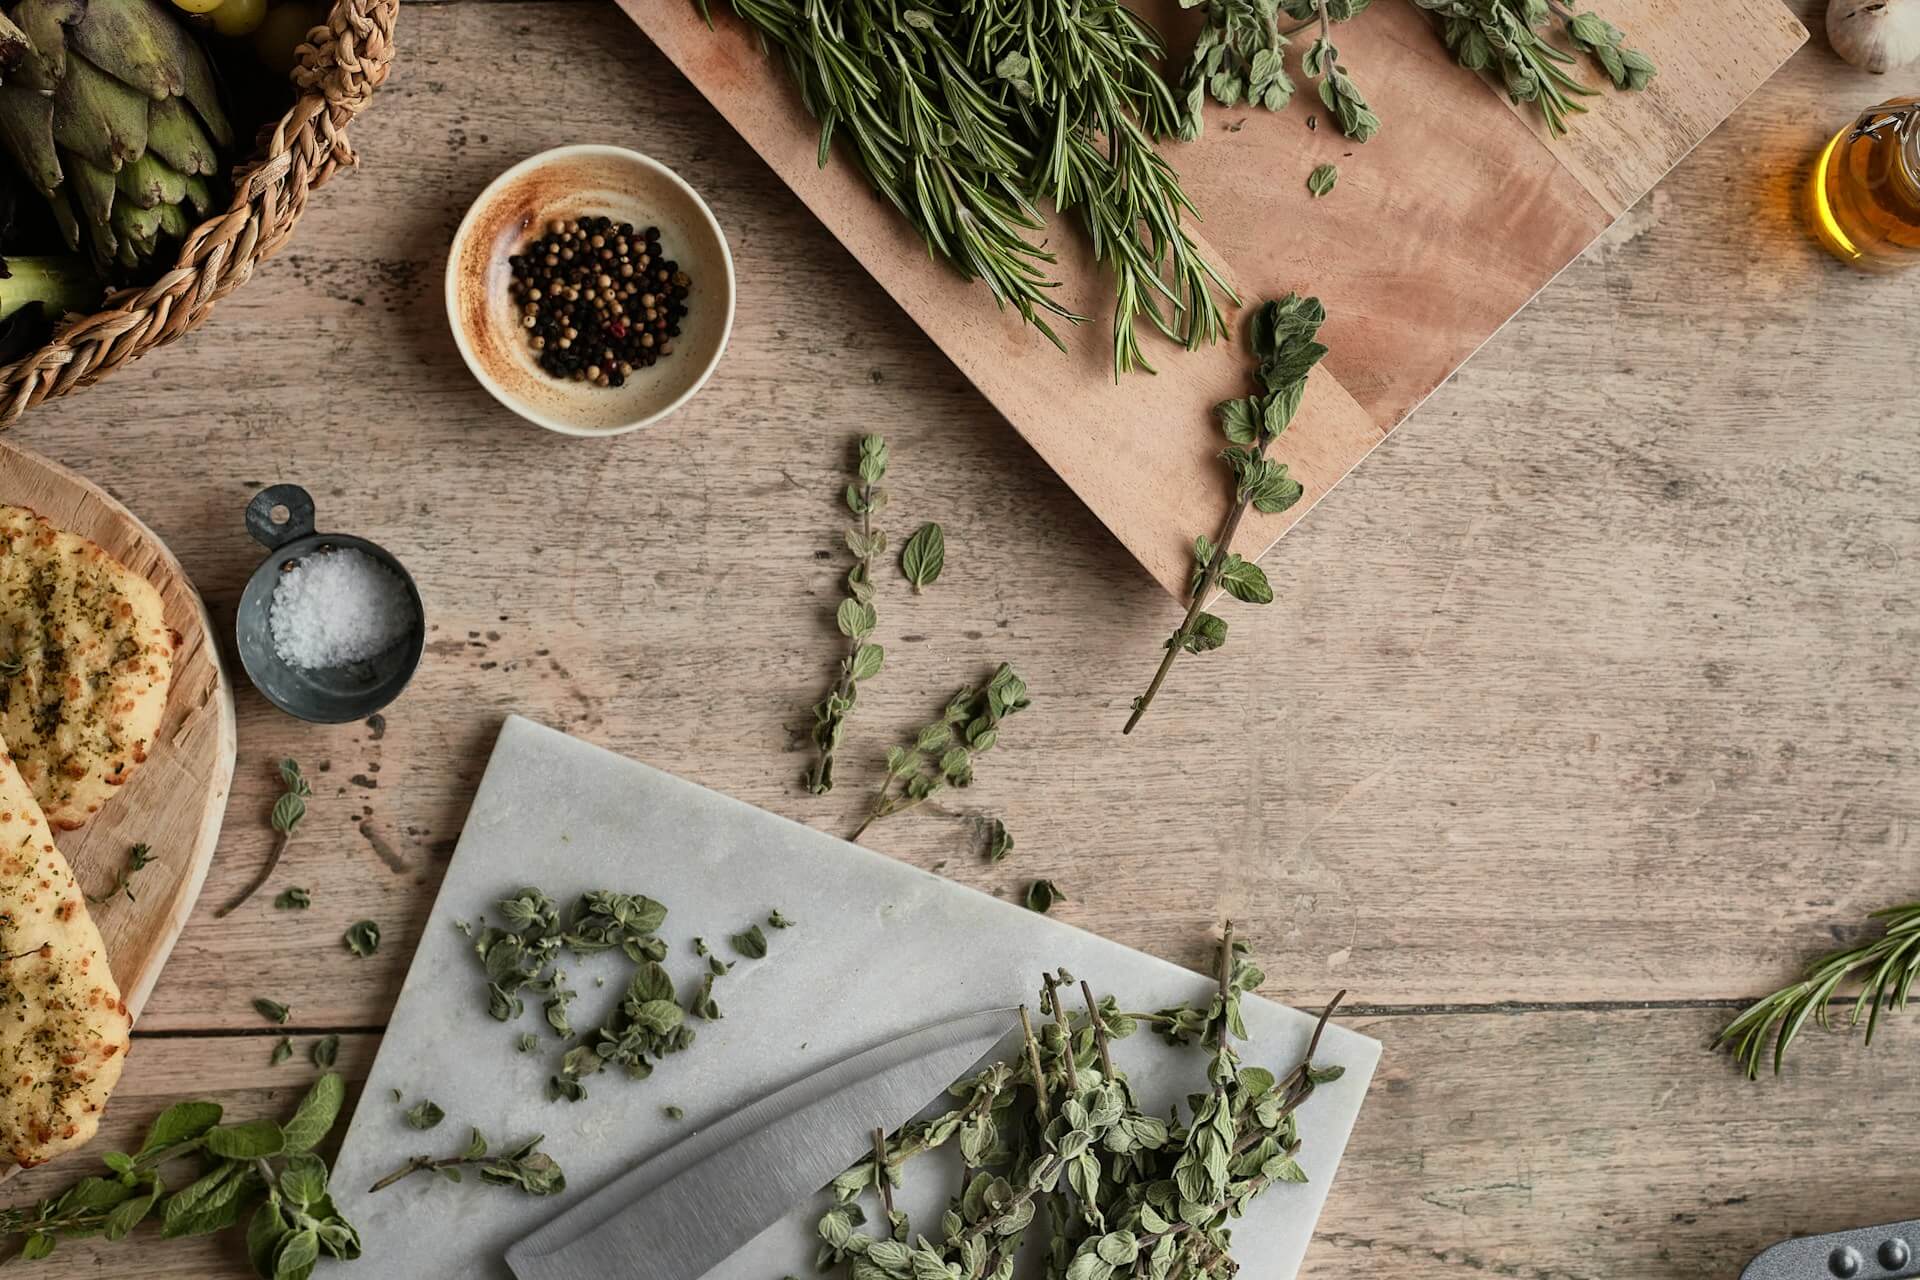 A Unique Culinary Adventure: Pairing Cannabis Strains with Different Foods